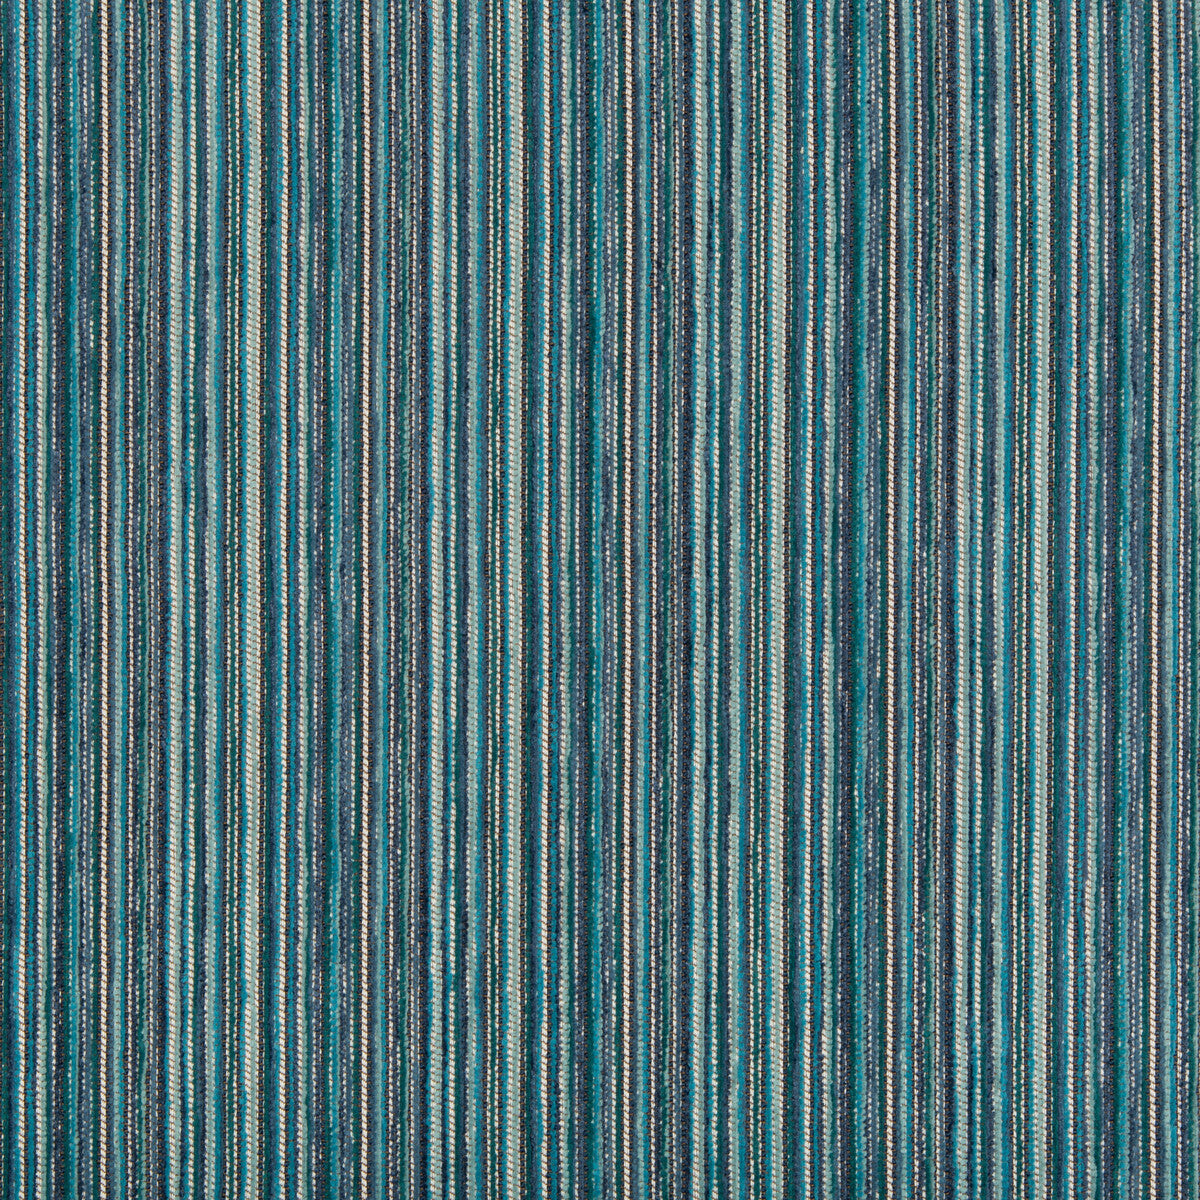 Kravet Design fabric in 34693-513 color - pattern 34693.513.0 - by Kravet Design in the Performance Crypton Home collection